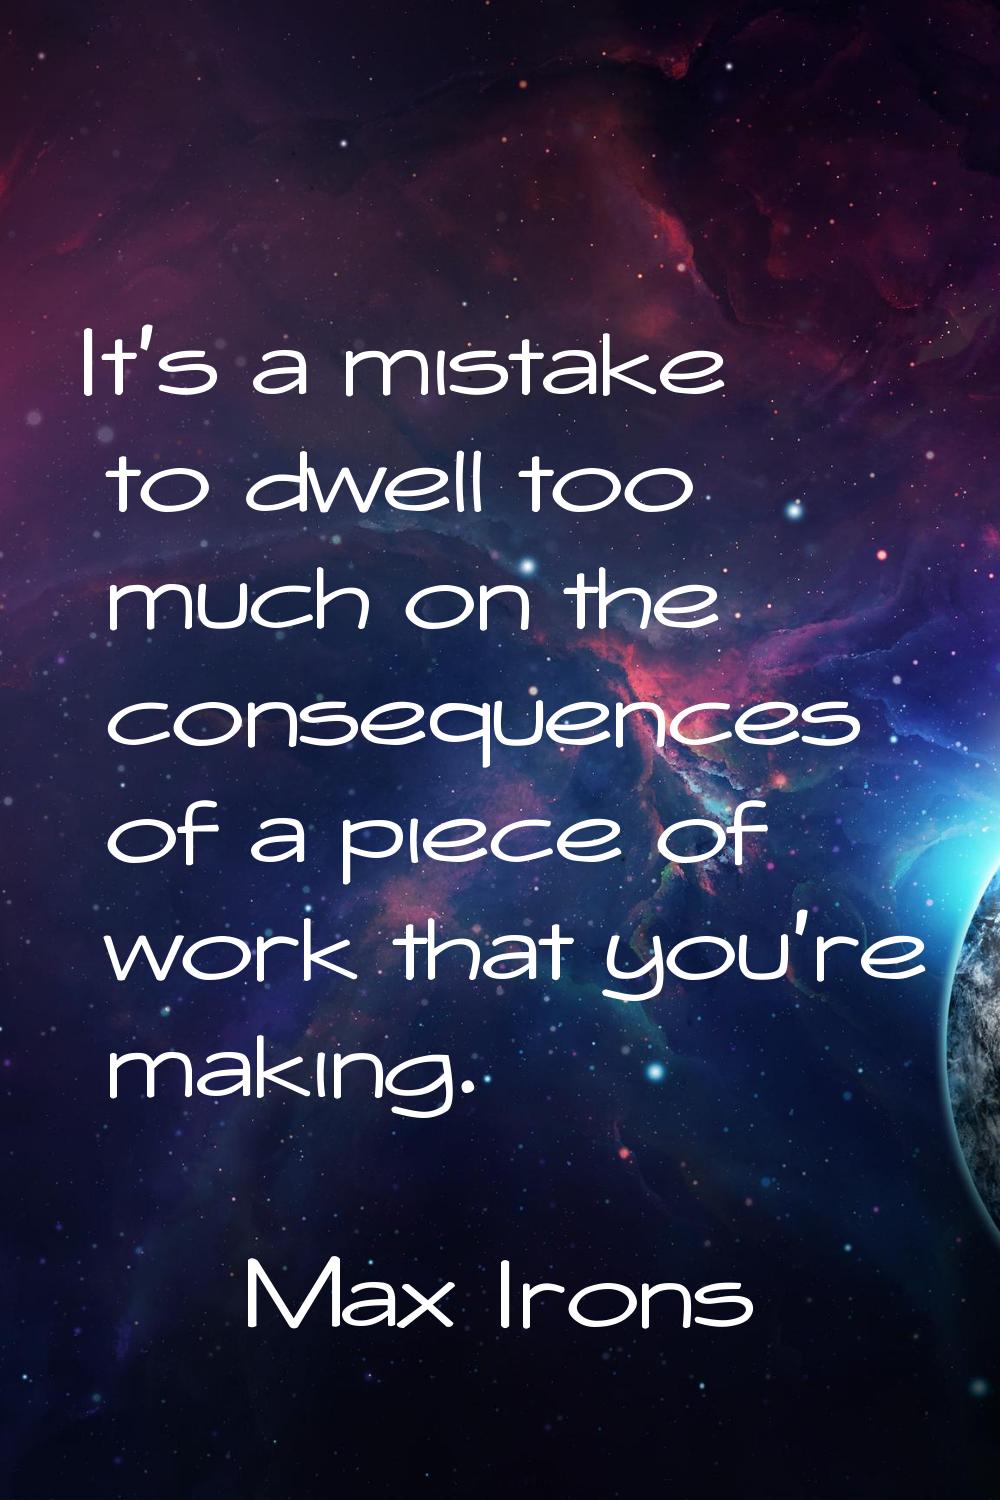 It's a mistake to dwell too much on the consequences of a piece of work that you're making.